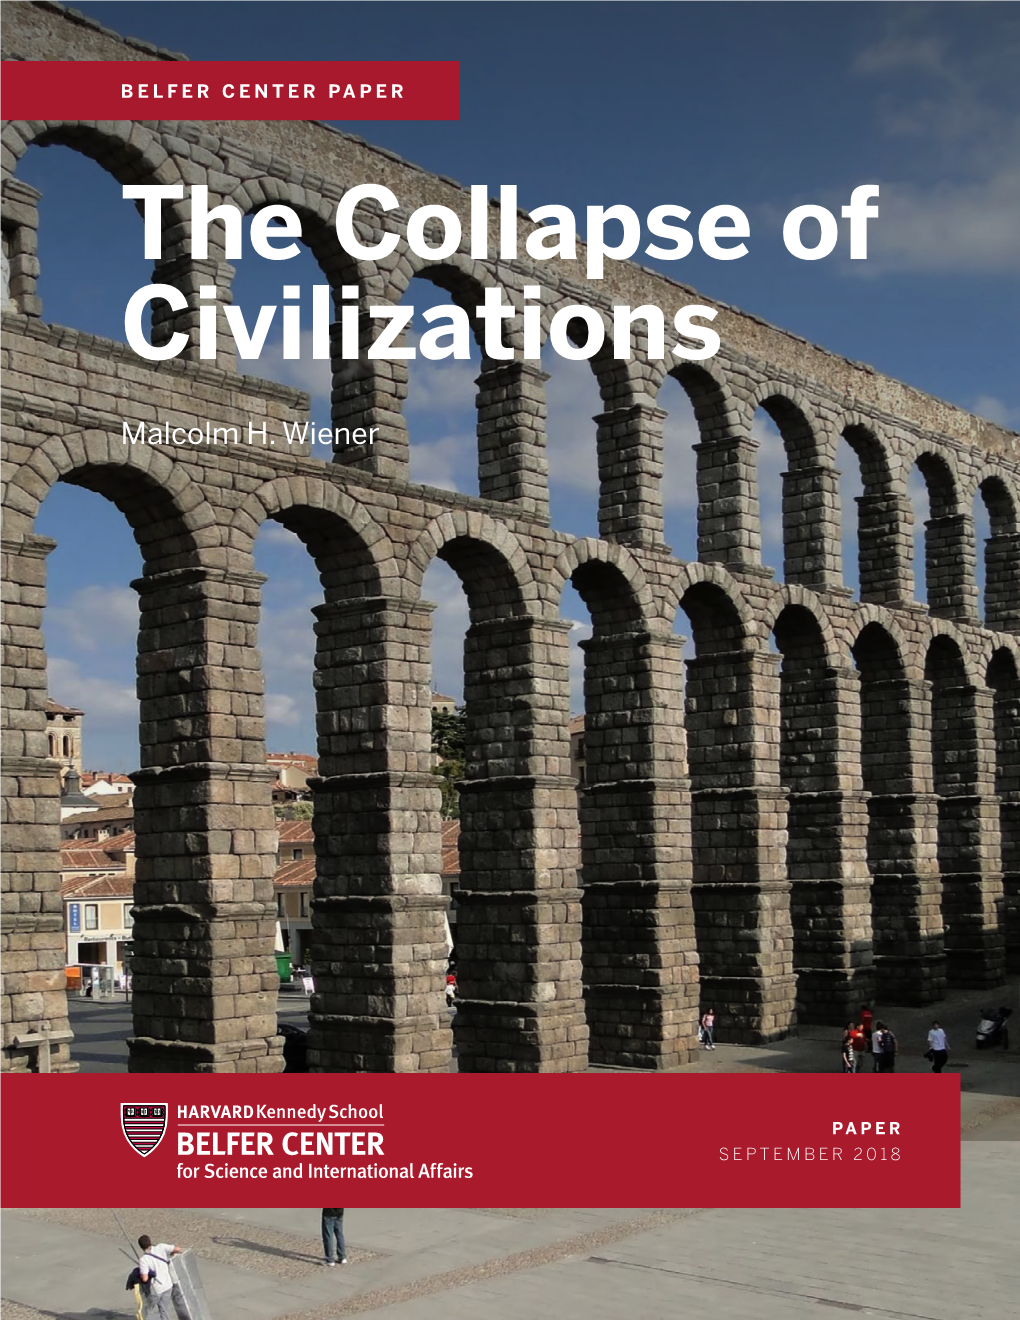 The Collapse of Civilizations